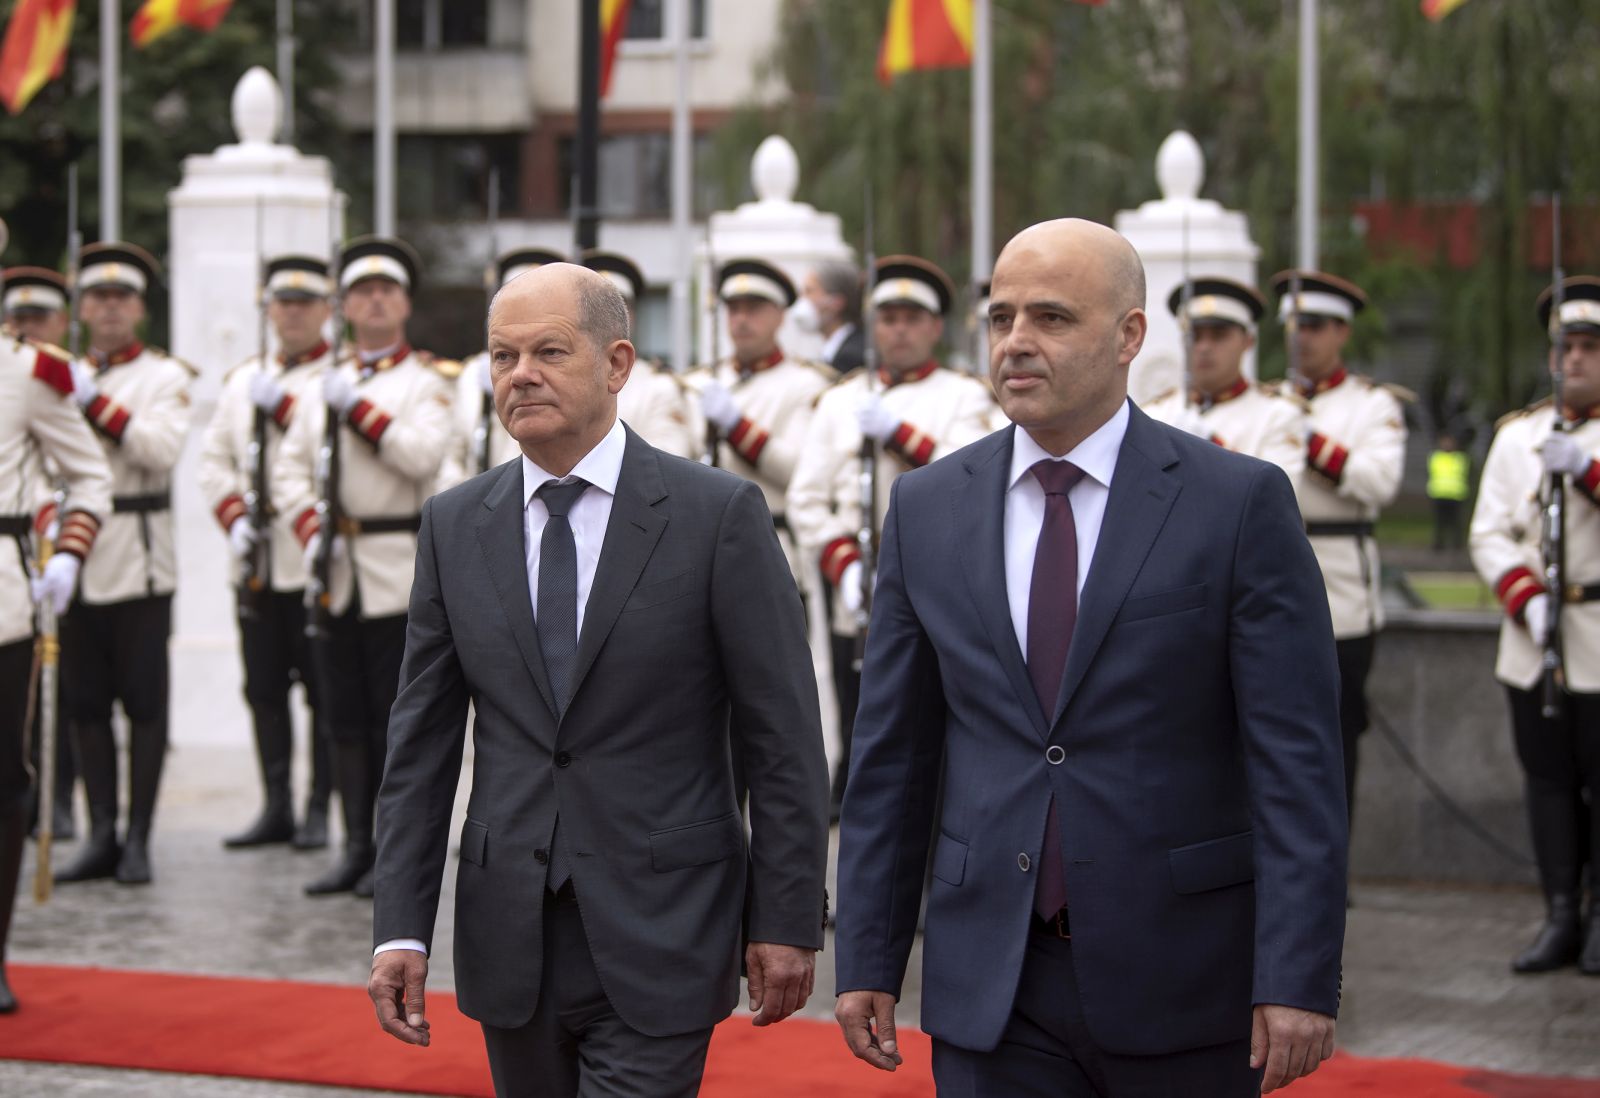 epa10007199 German Chancellor Olaf Scholz (L) and North Macedonia's Prime Minister Dimitar Kovacevski (R) inspect the guard of honor during a welcome ceremony in Skopje, Republic of North Macedonia, 11 June 2022. Scholz is on a one-day official visit to North Macedonia as part of his Balkan tour.  EPA/Georgi Likovski